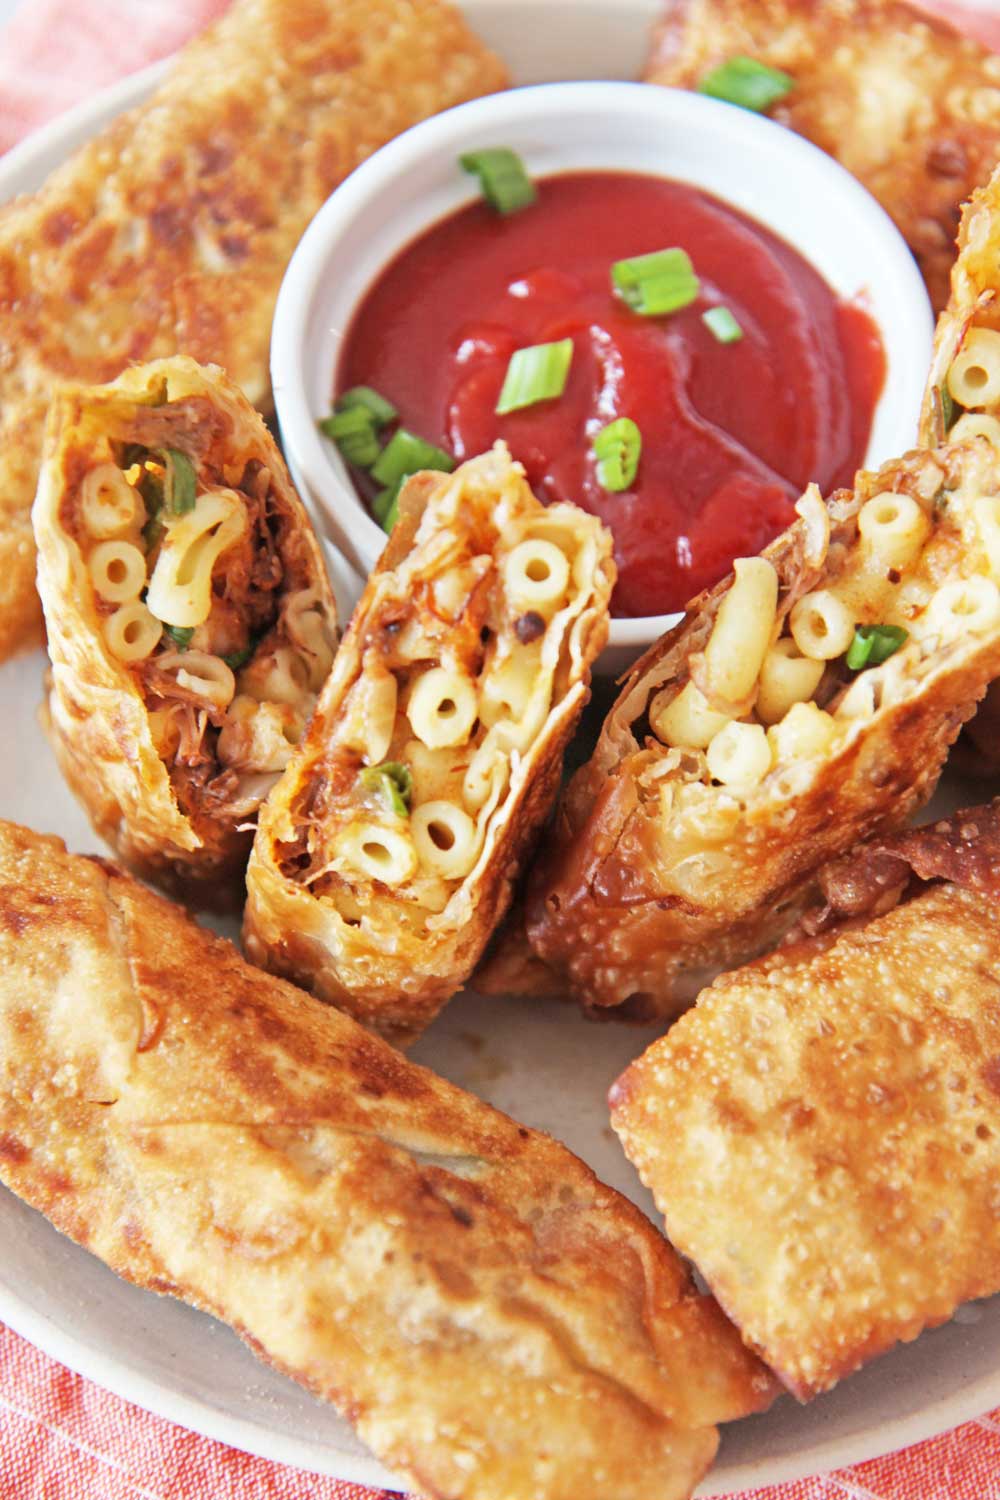 Leftover Mac and Cheese Egg rolls. Leftover Mac and cheese, short ribs, scallions, and lime make this the perfect leftover remake! www.ChopHappy.com #leftovers #eggrolls